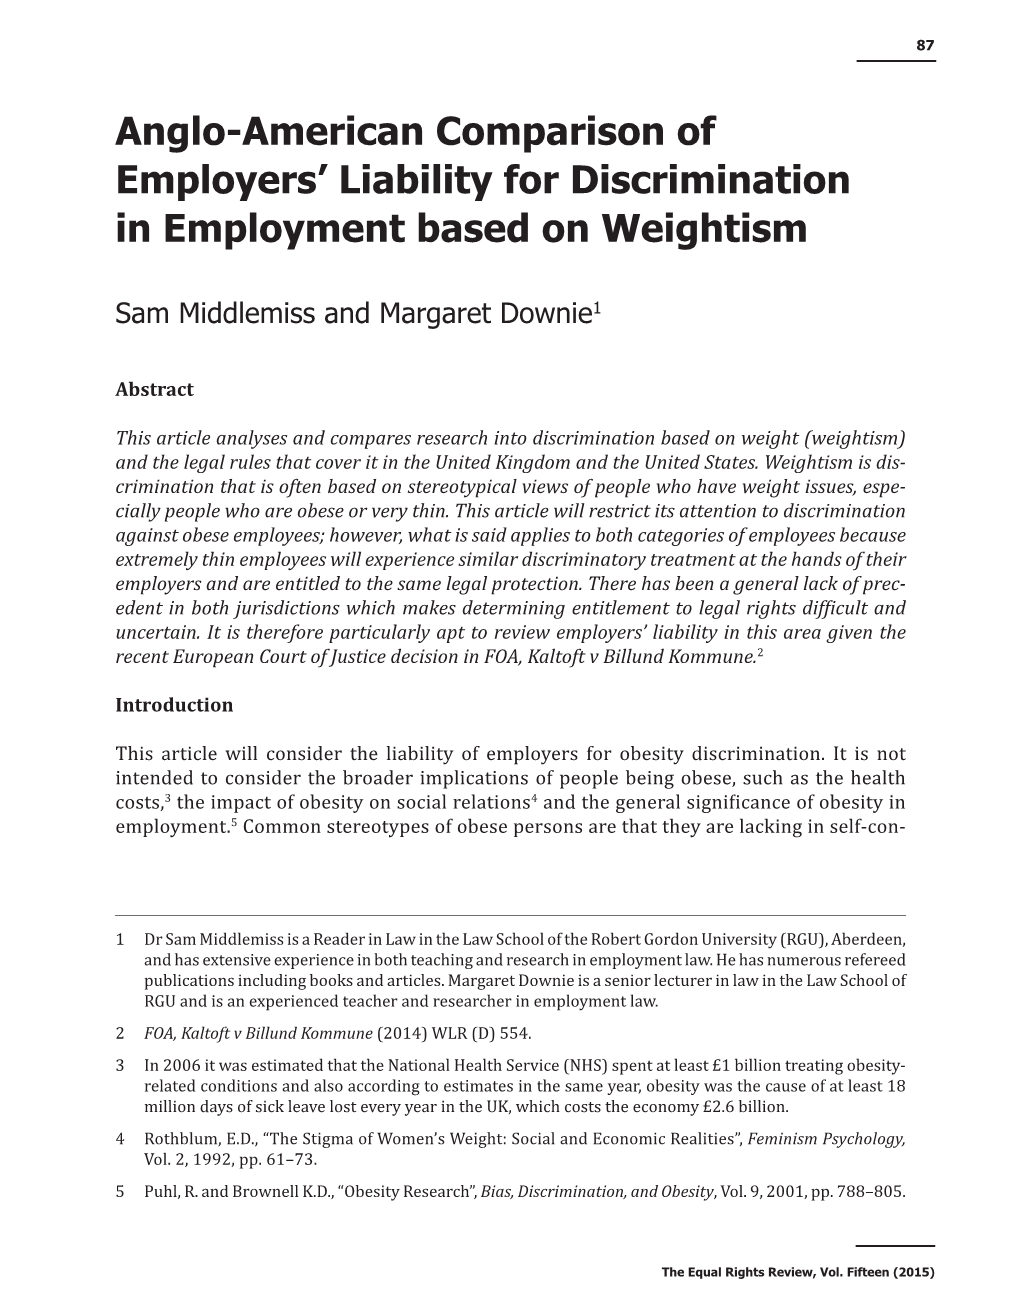 Anglo-American Comparison of Employers' Liability For